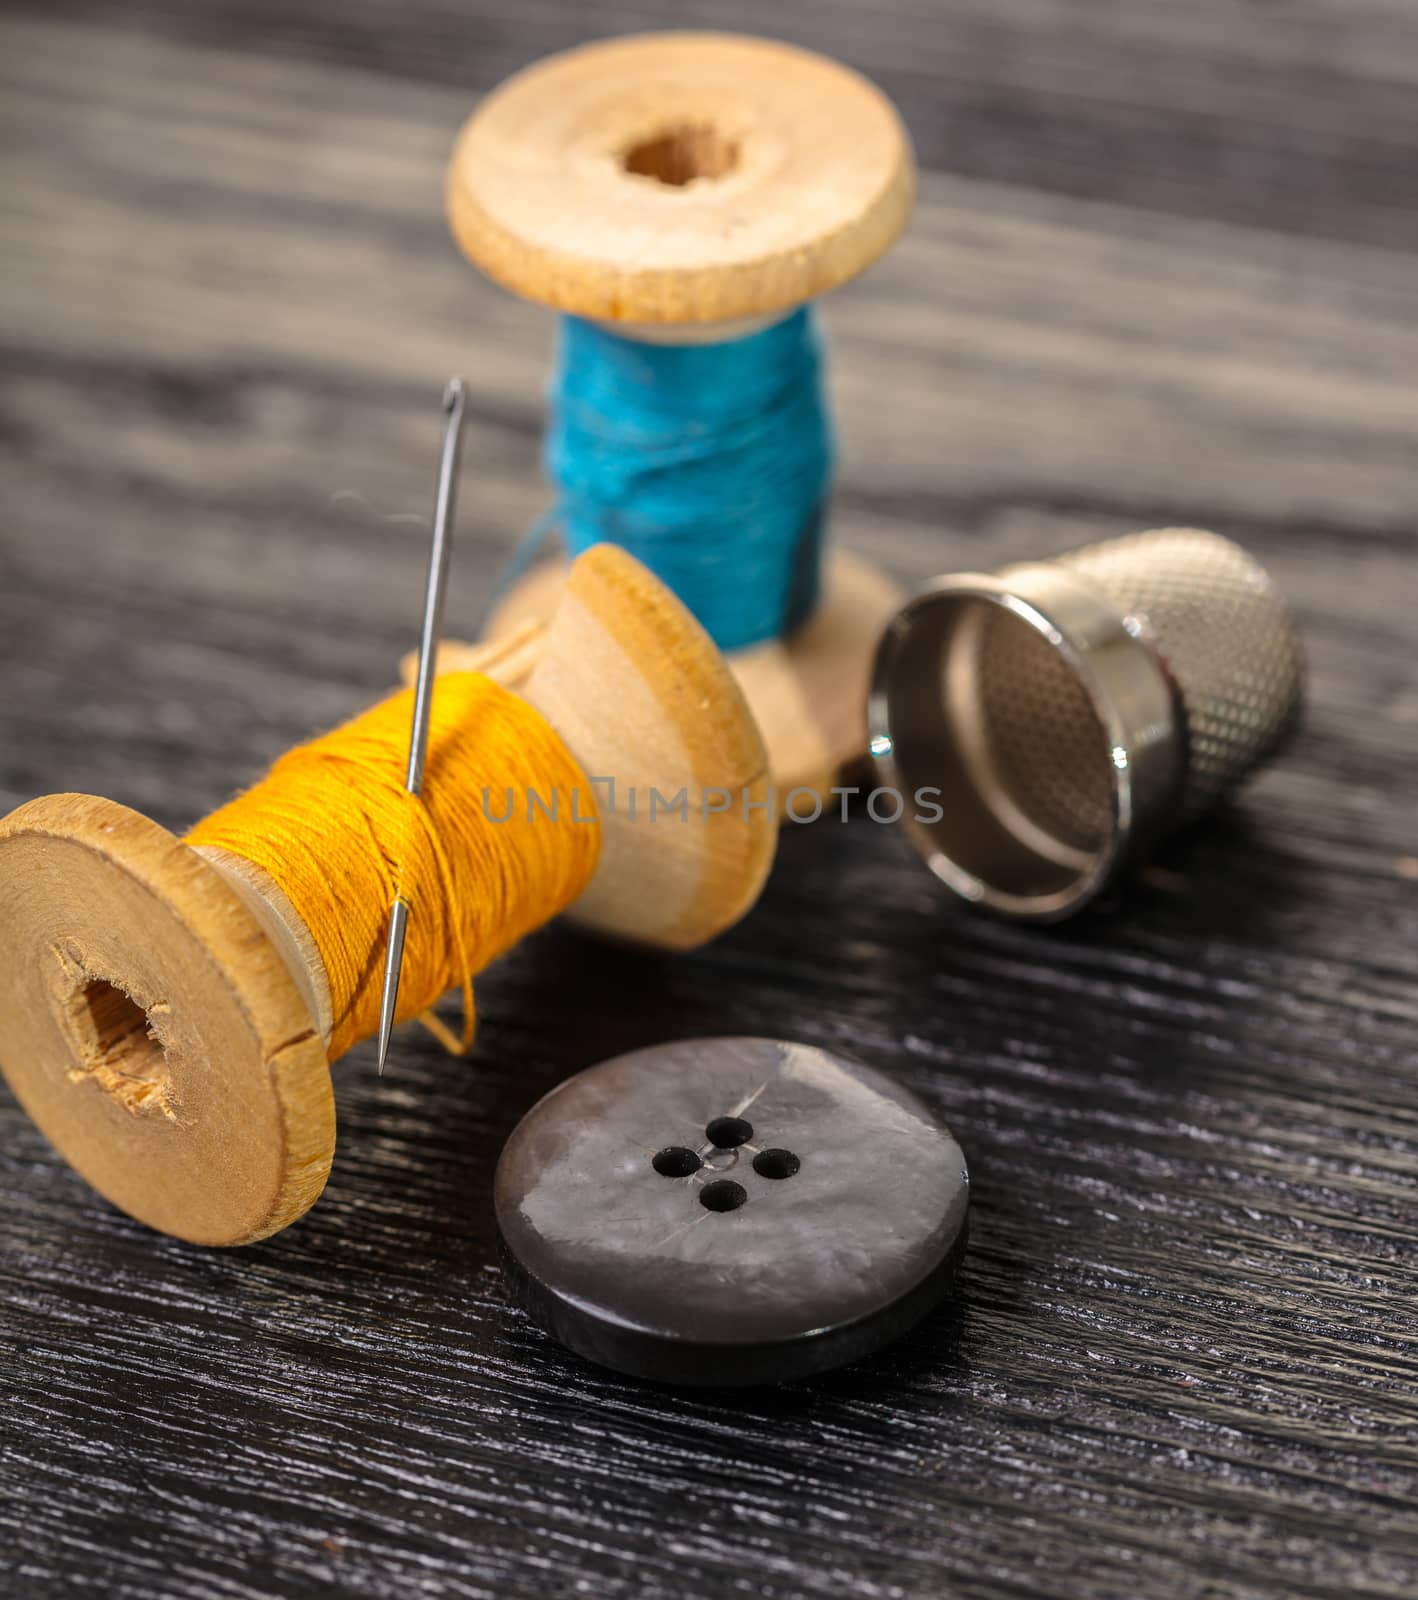 Thread with a thimble and button on black wooden background